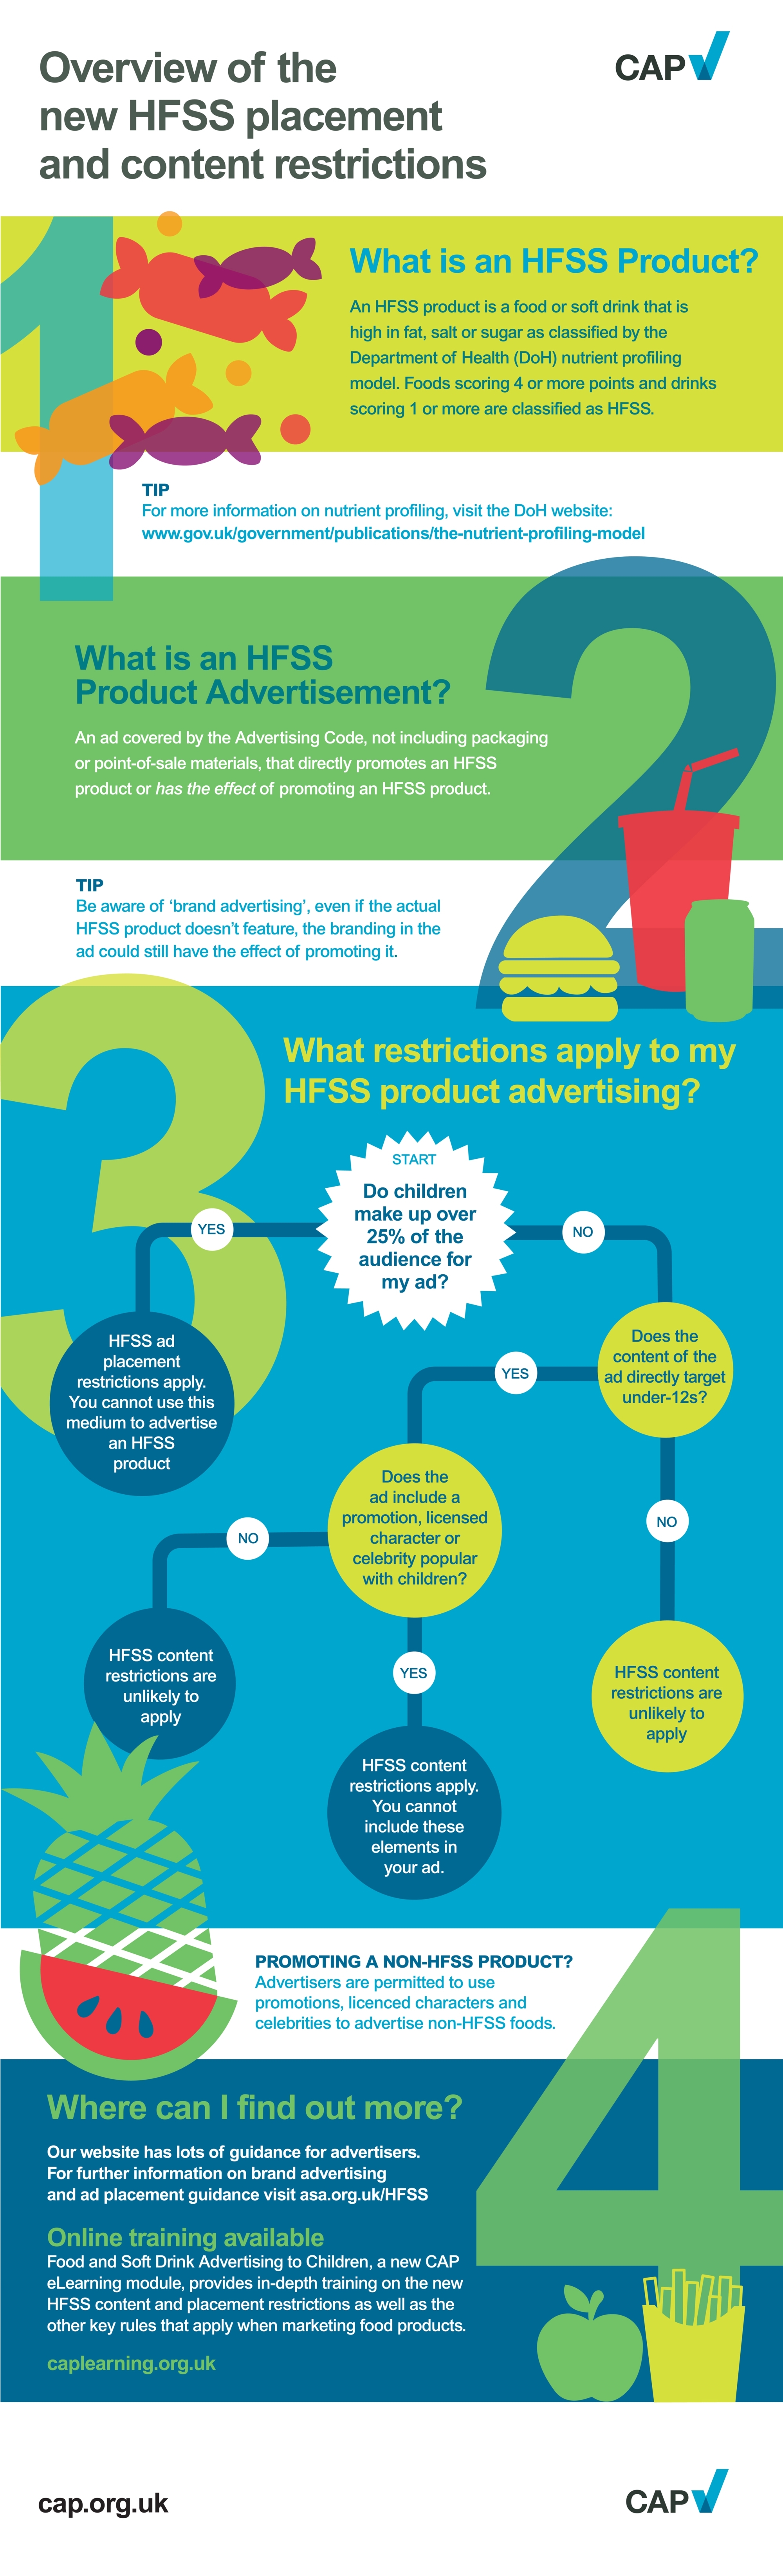 Infographic for CAP rules on HFSS adverts